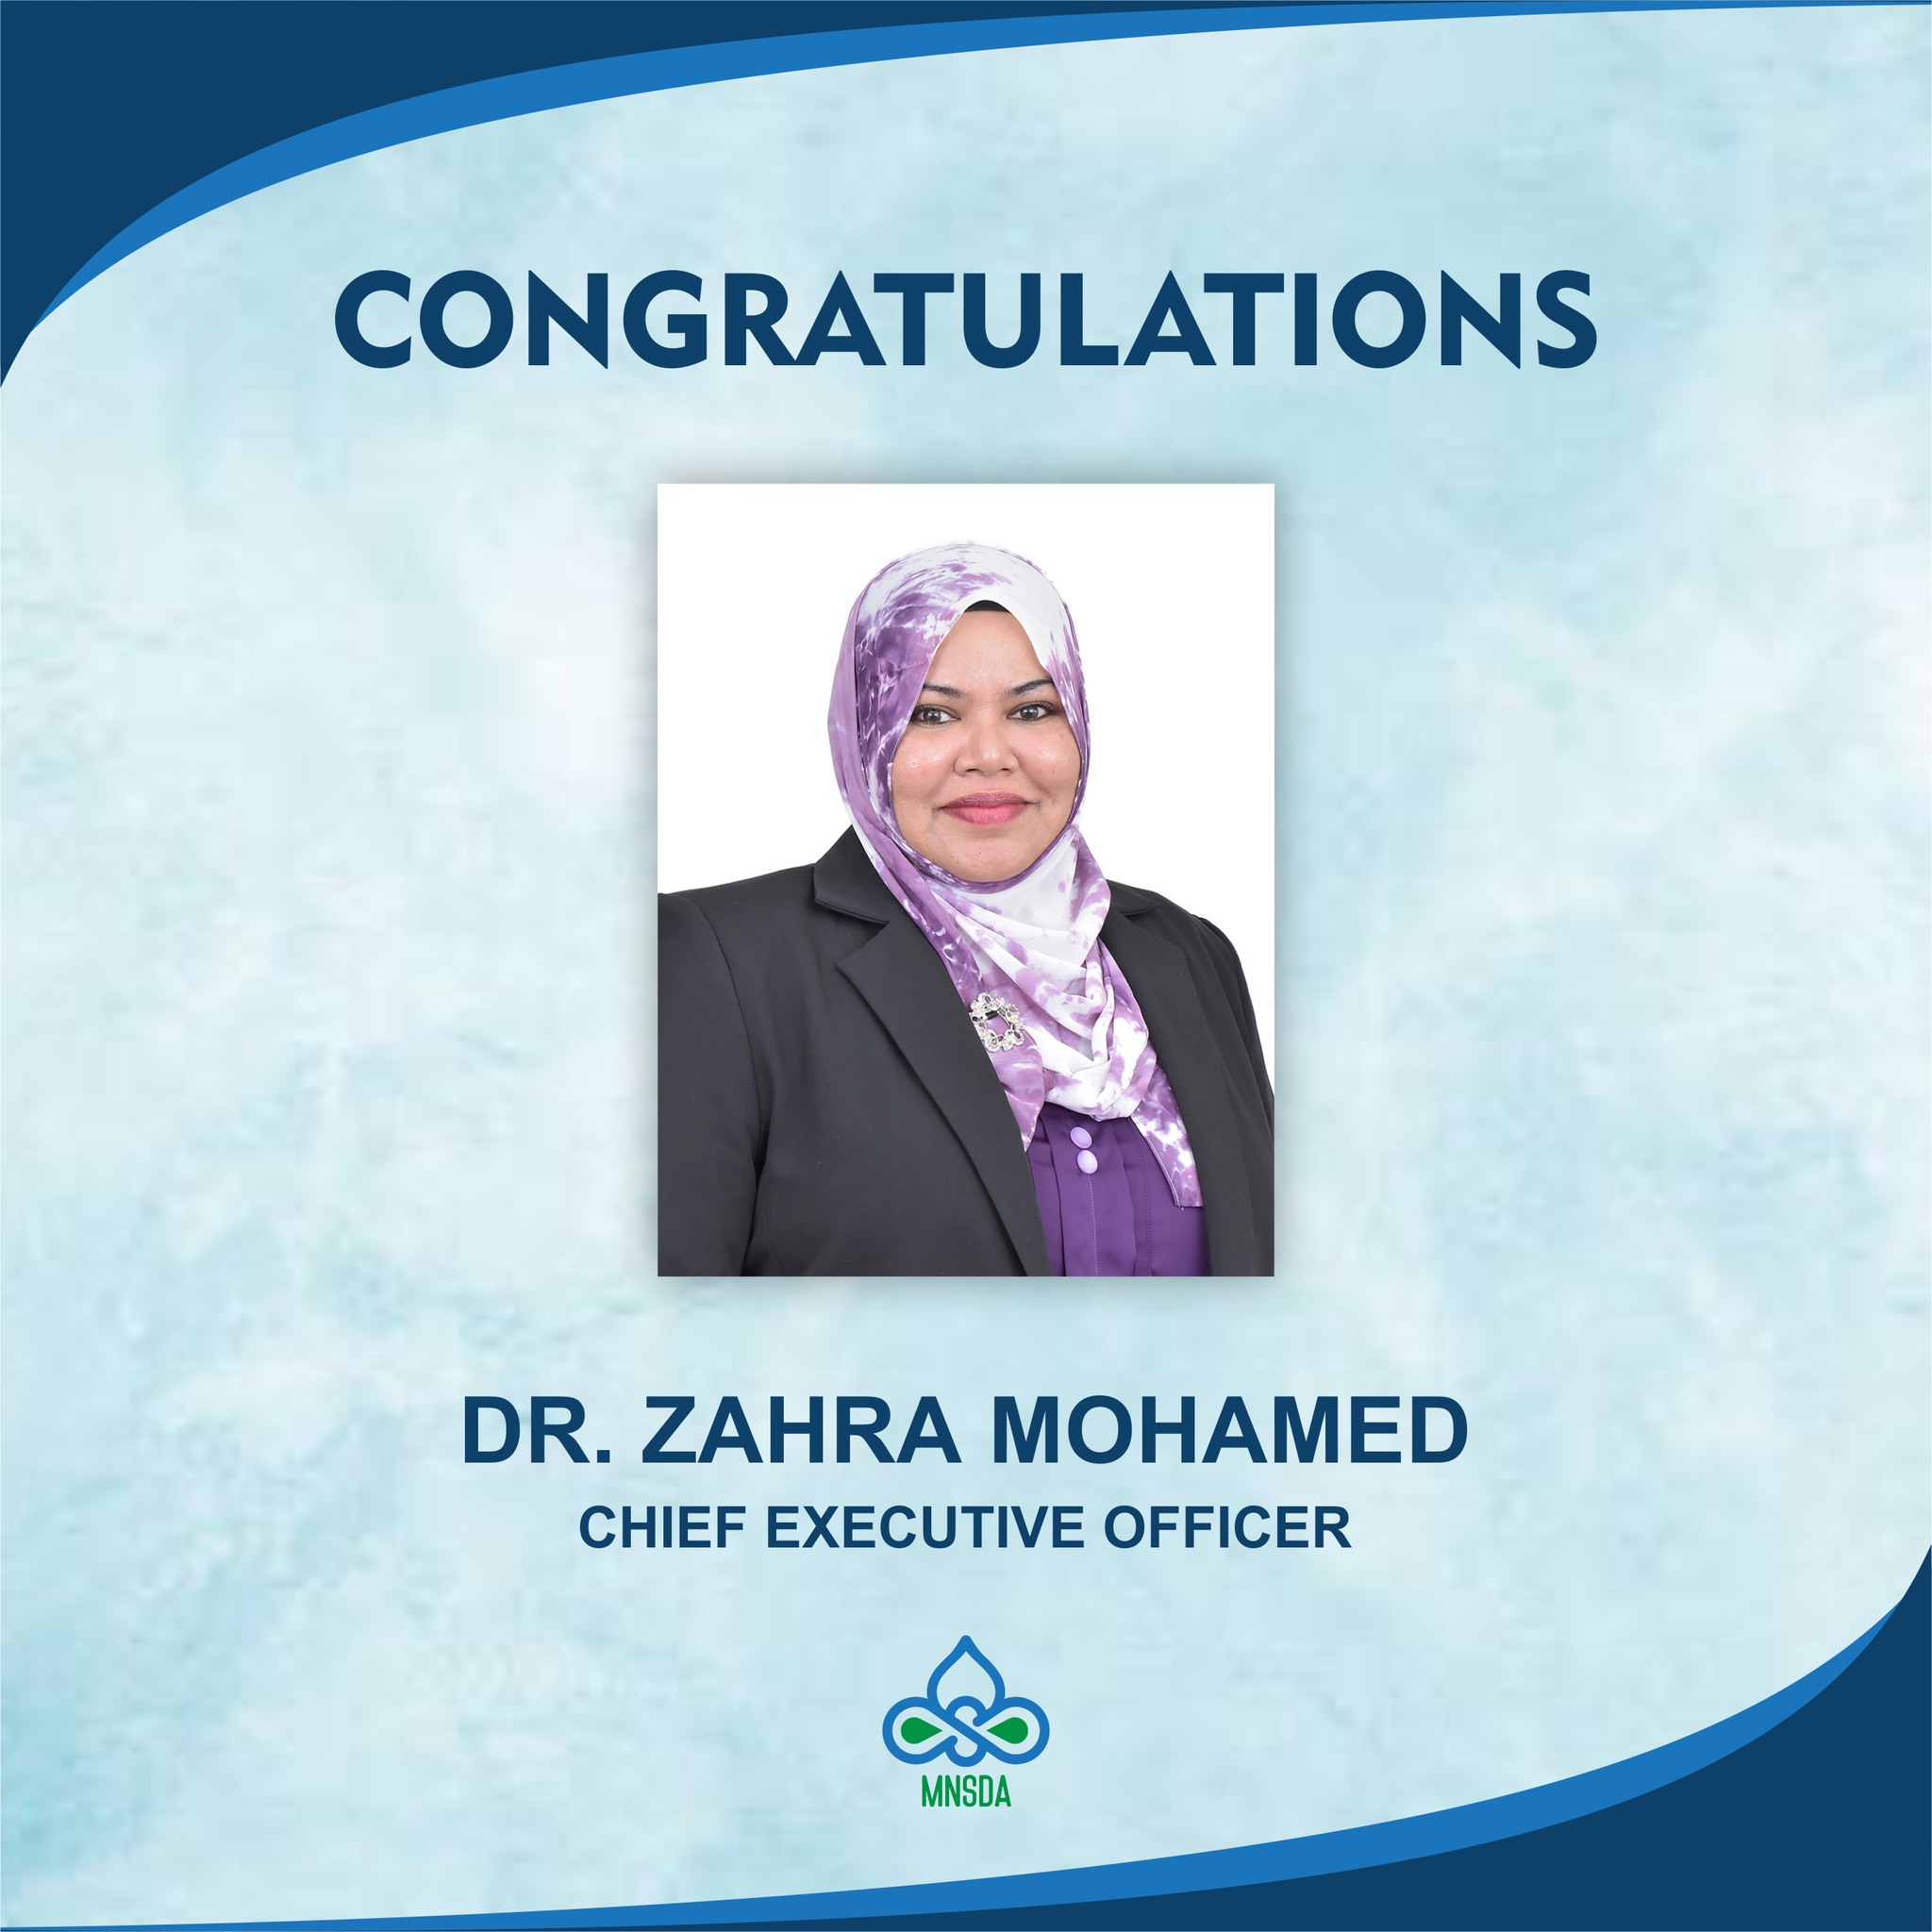 Dr. Zahra Mohamed has been appointed as the CEO of the MNSDA